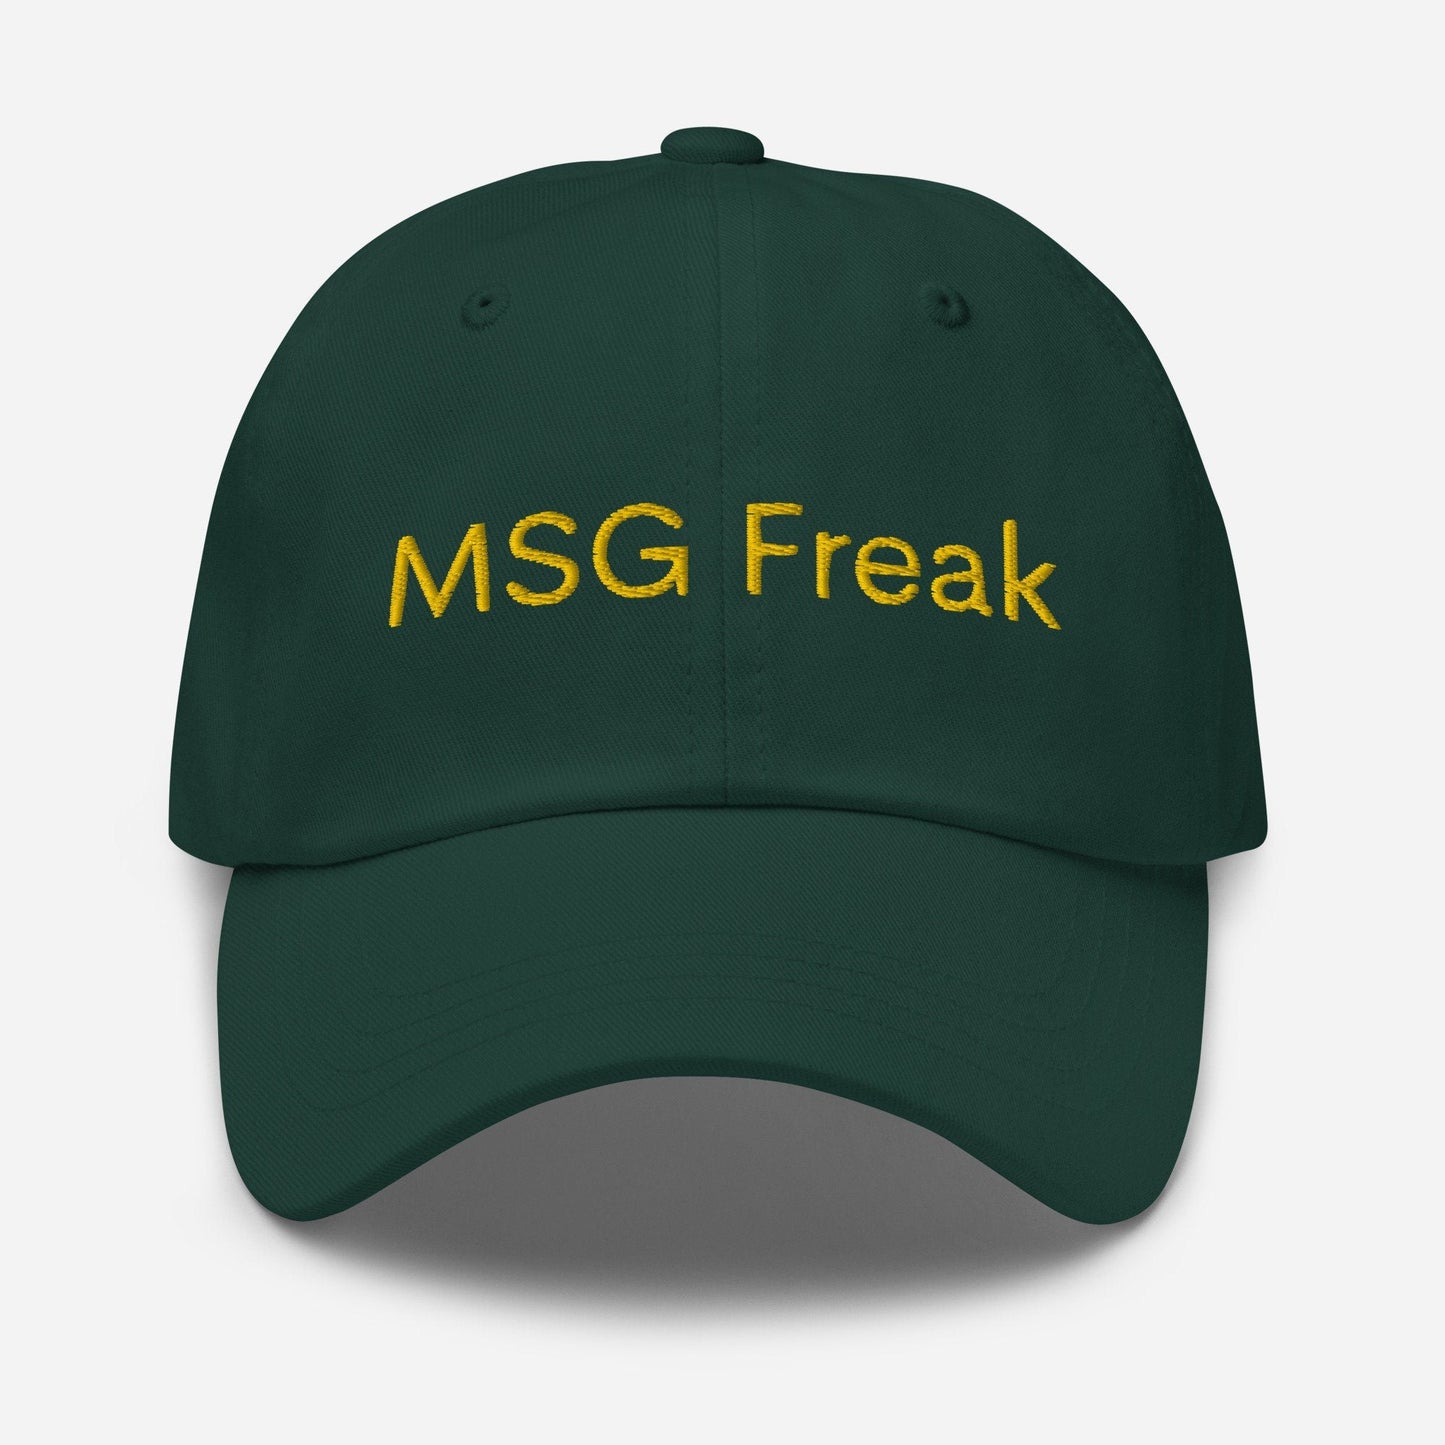 MSG Dad Hat - Gift for food lovers and home cook - Embroidered Cotton Cap